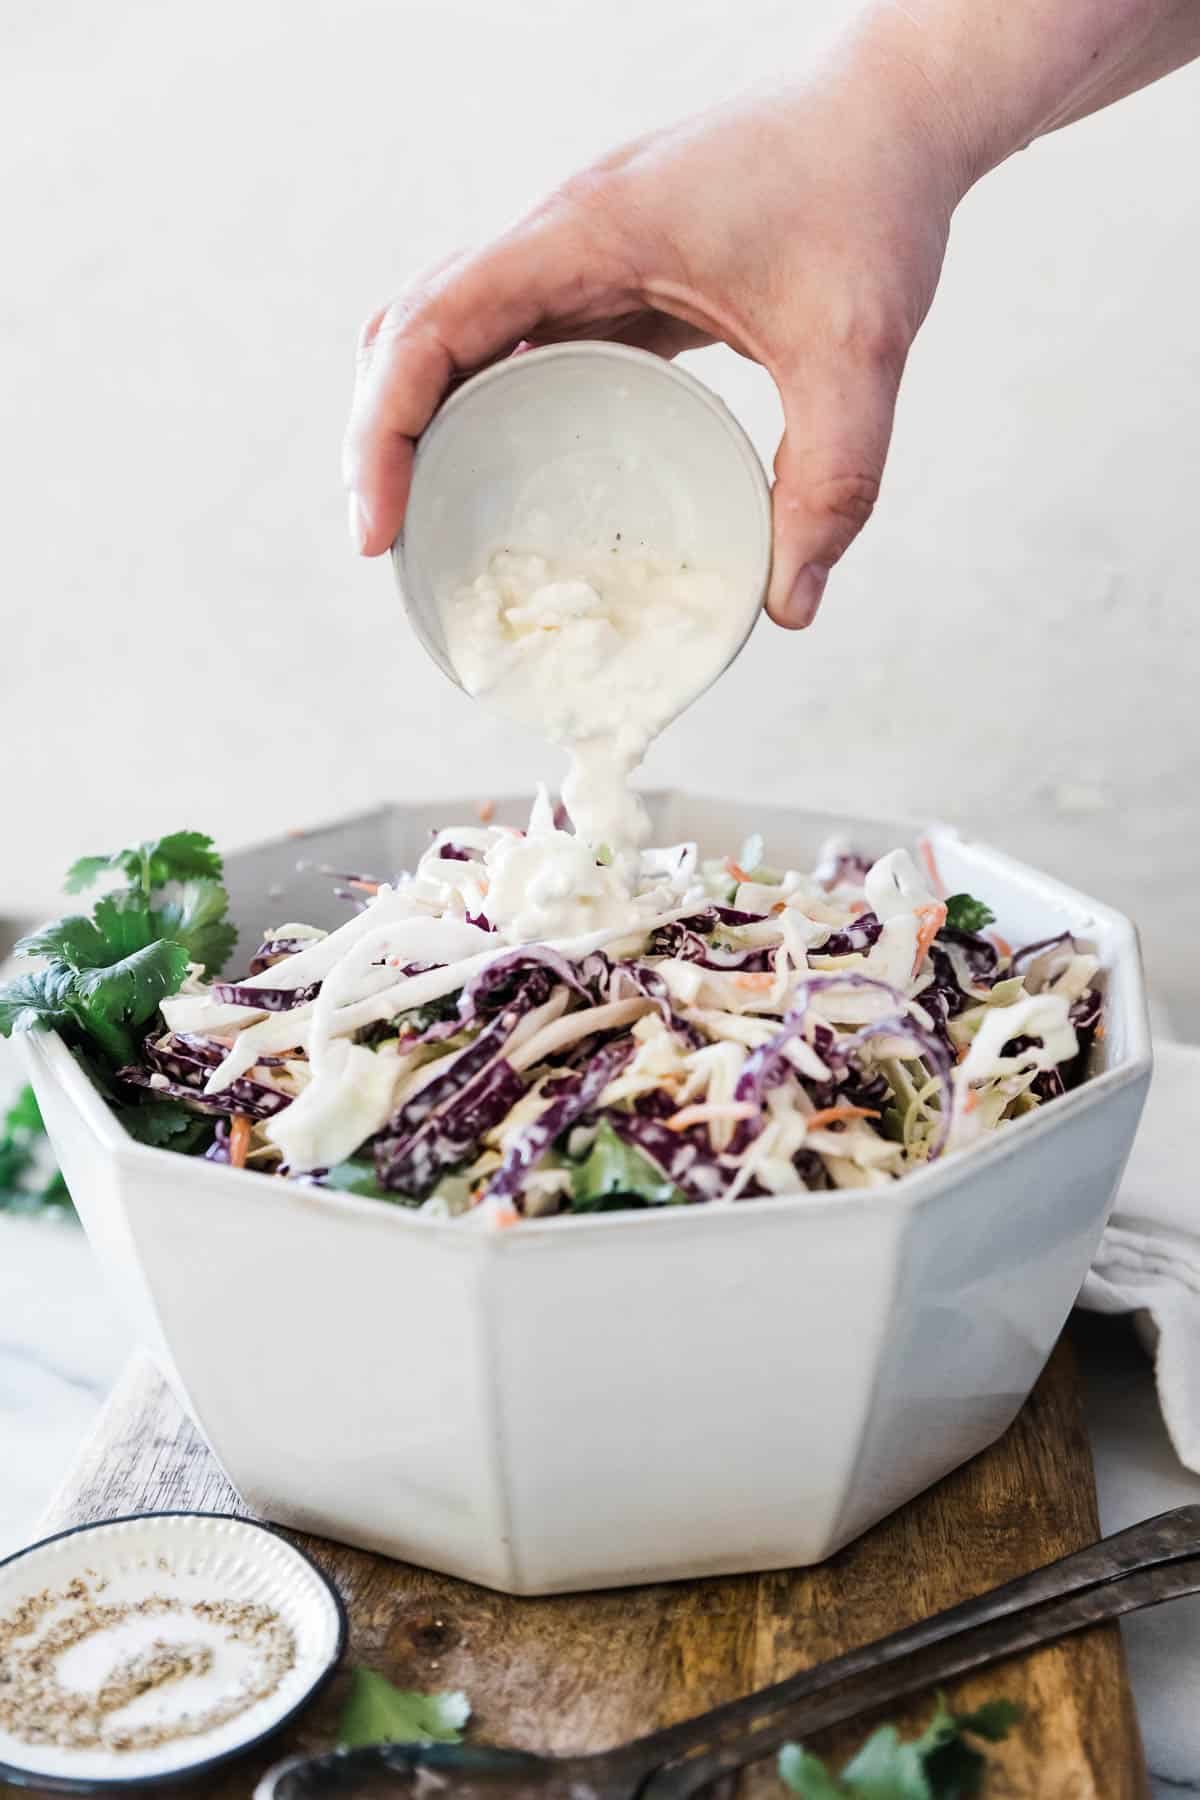 Blue cheese coleslaw in a white bowl. Blue cheese dressing is being poured on top.